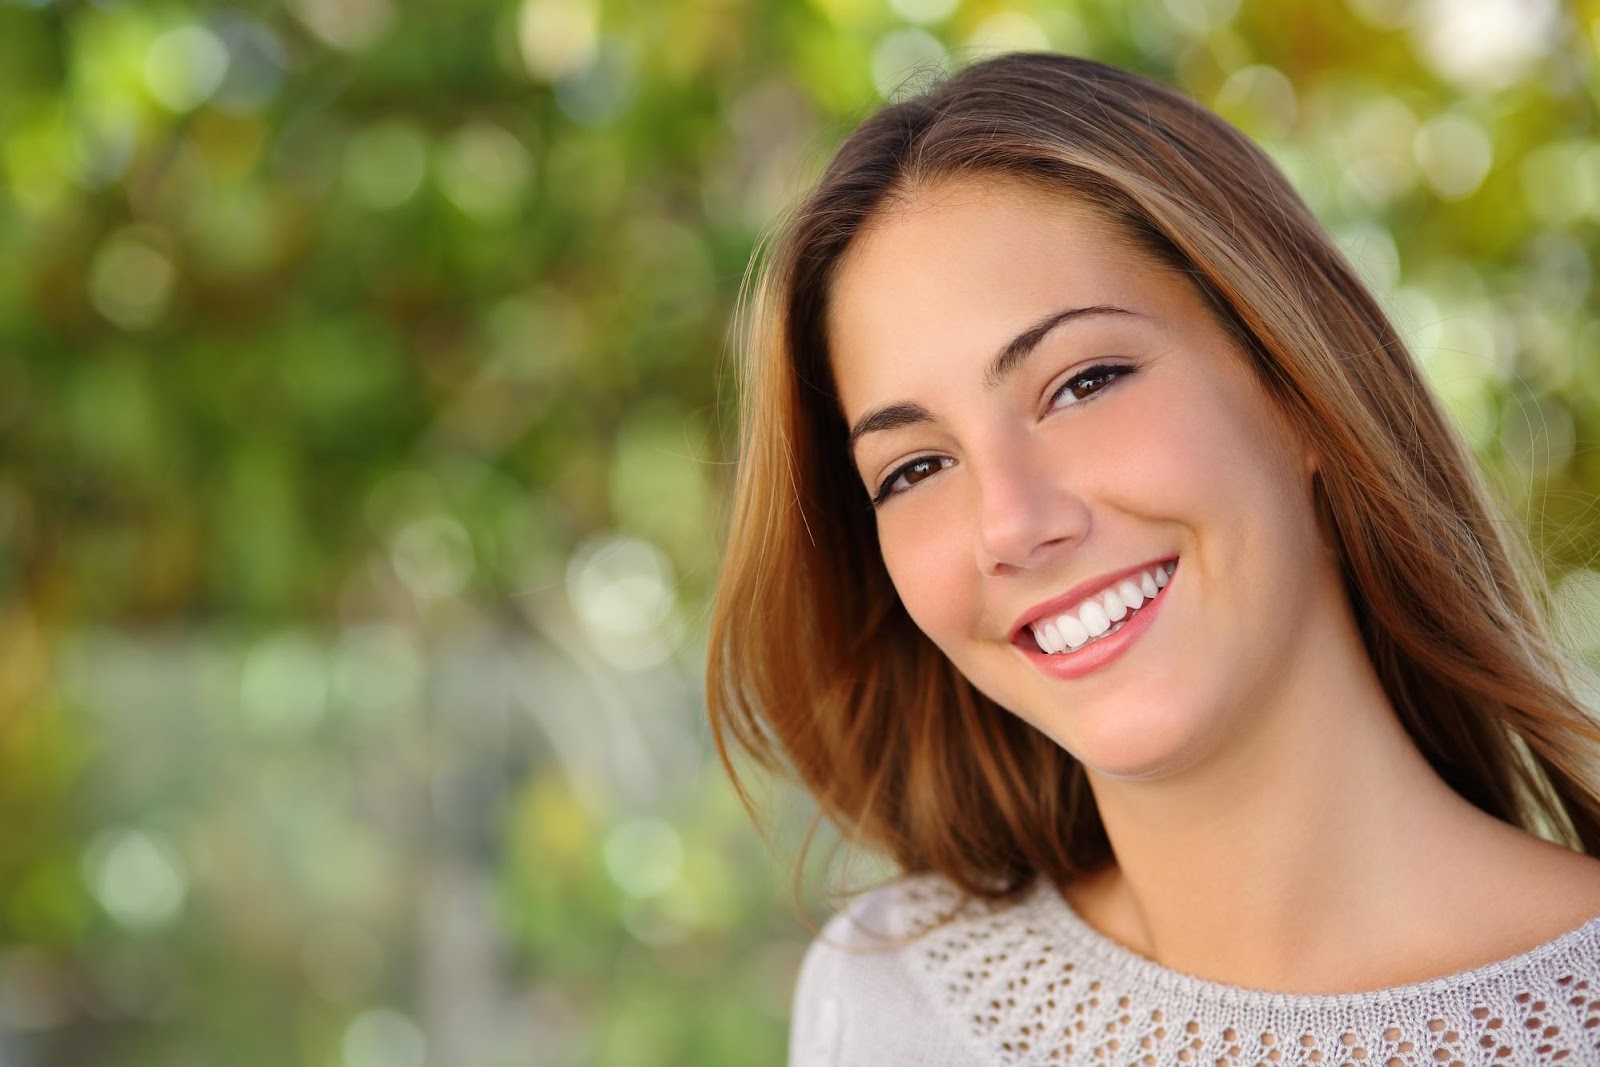 How To Find An Experienced Cosmetic Dentist Near Me